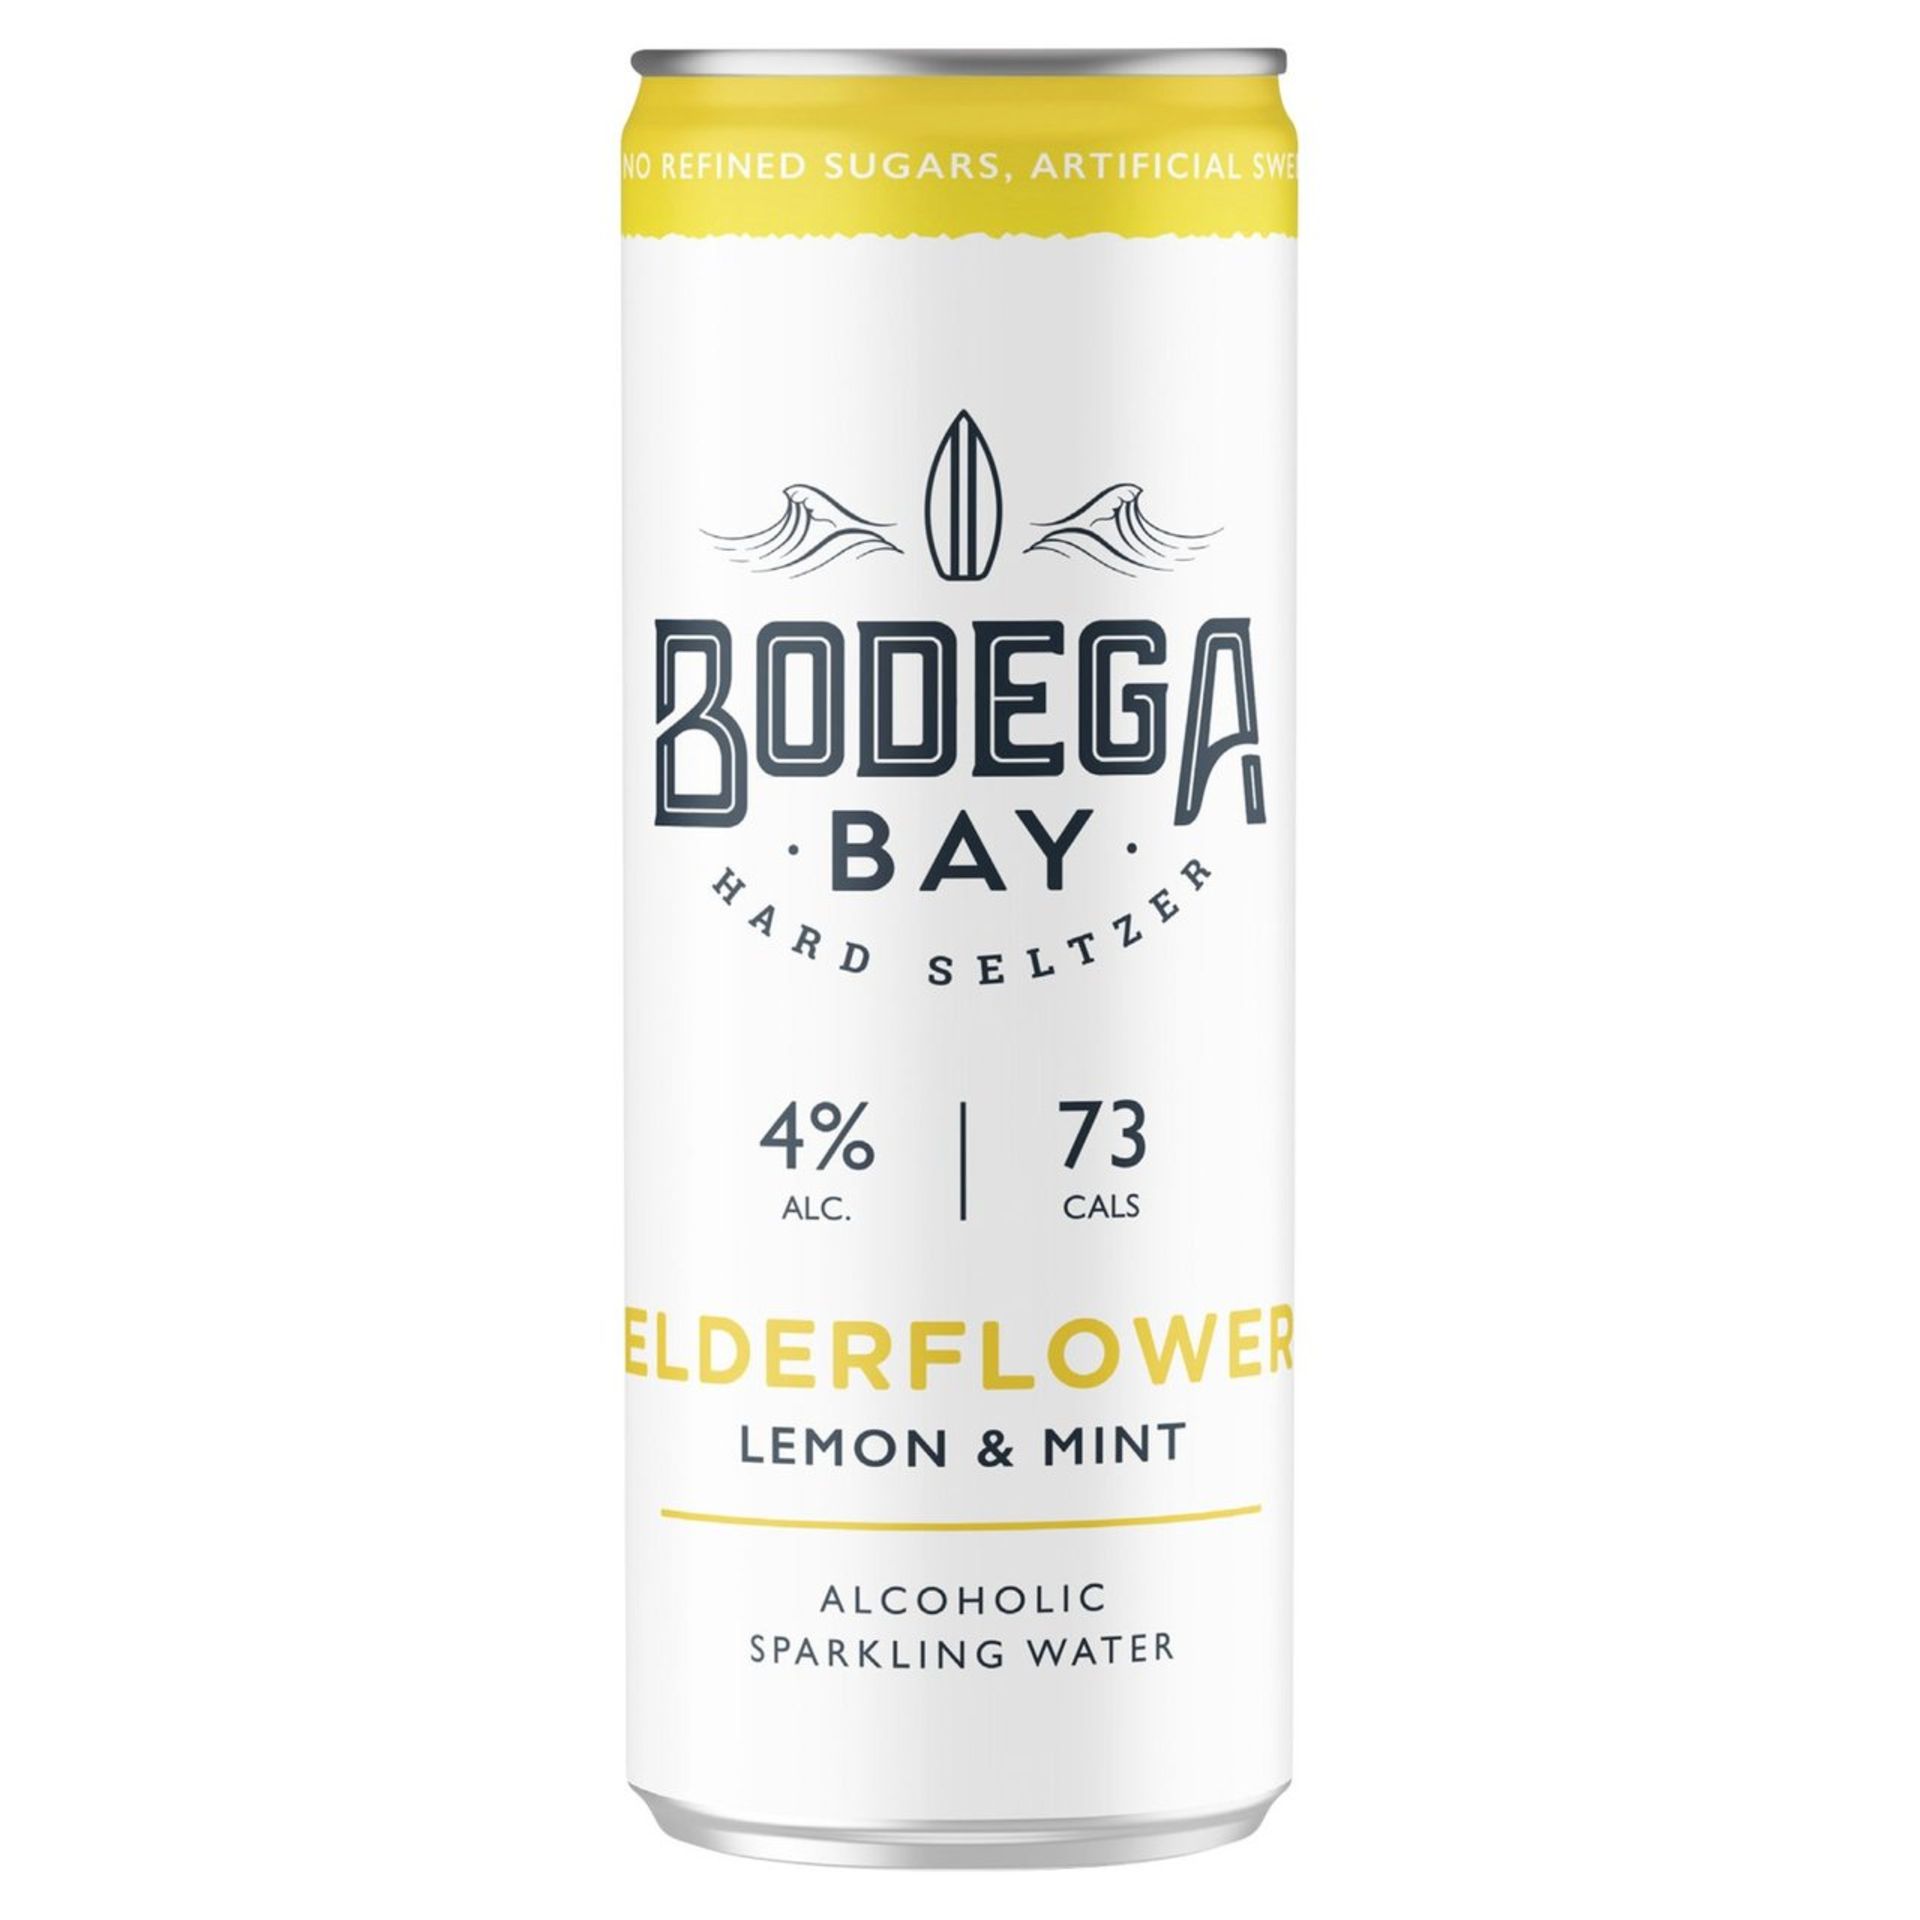 360 x Cans of Bodega Bay Hard Seltzer 250ml Alcoholic Sparkling Water Drinks - Various Flavours - Image 15 of 15